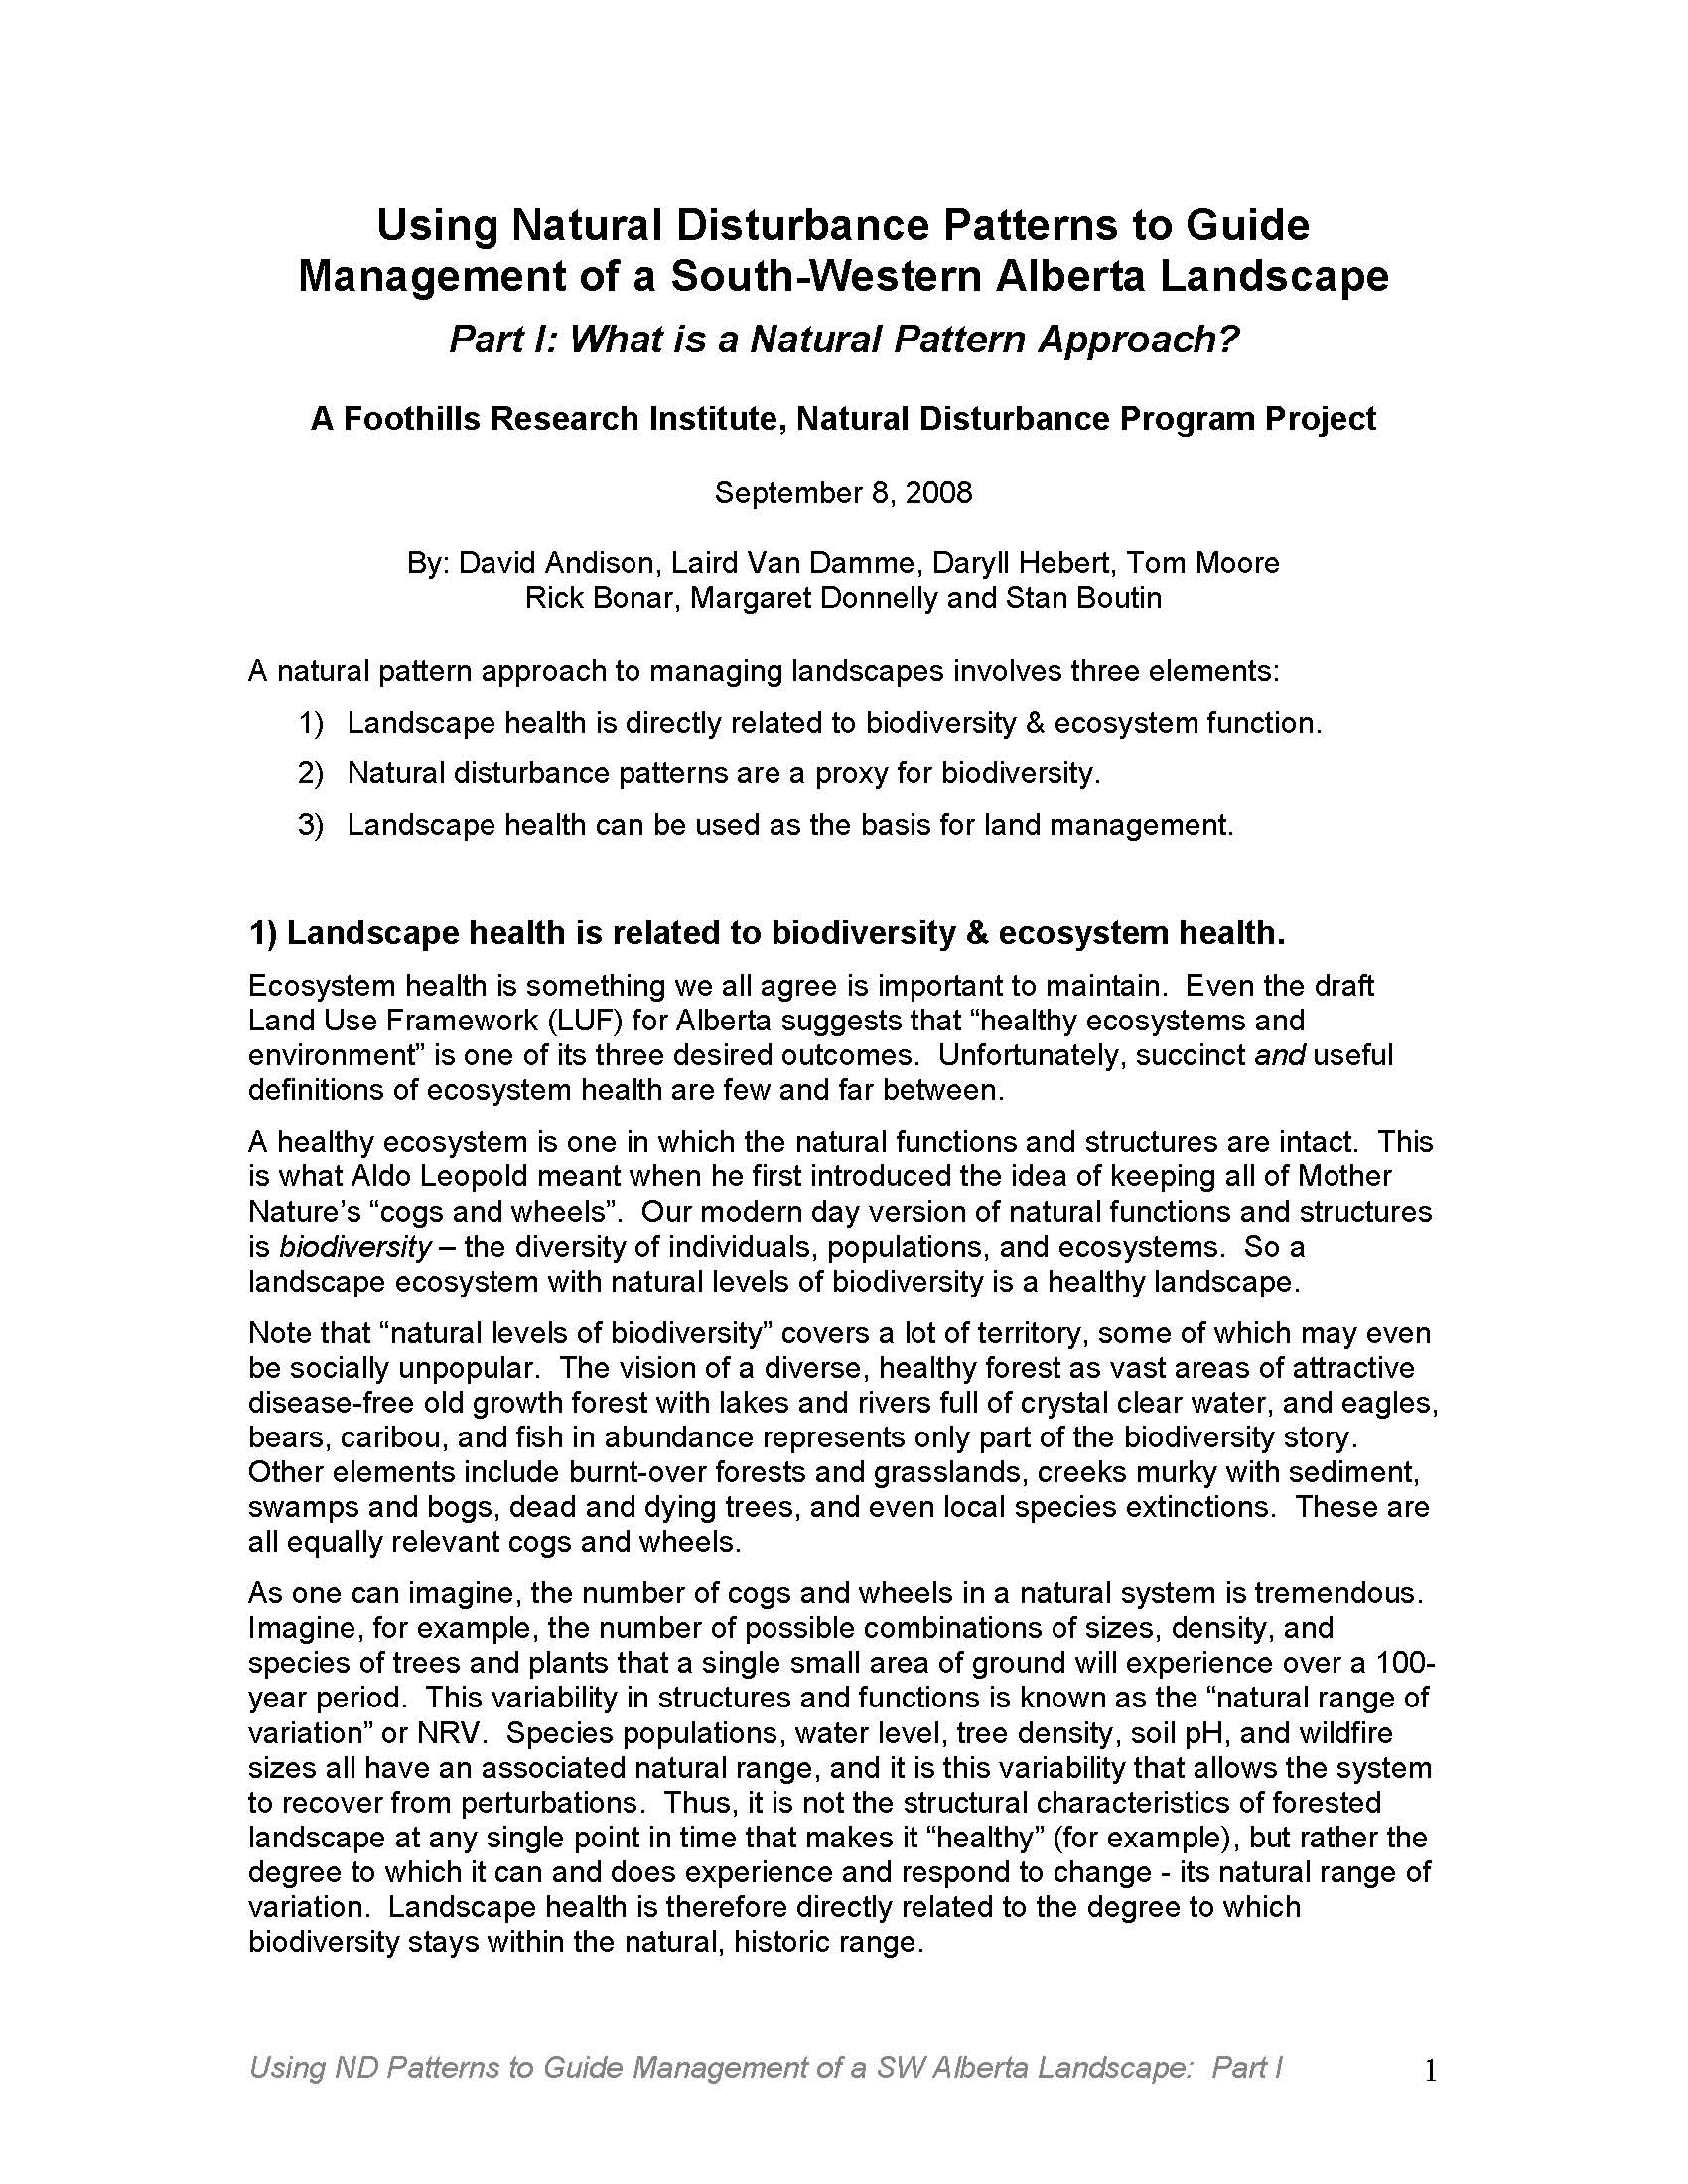 Using Natural Disturbance Patterns to Guide Management of a South-Western Alberta Landscape. Part 1: What is a Natural Pattern Approach?